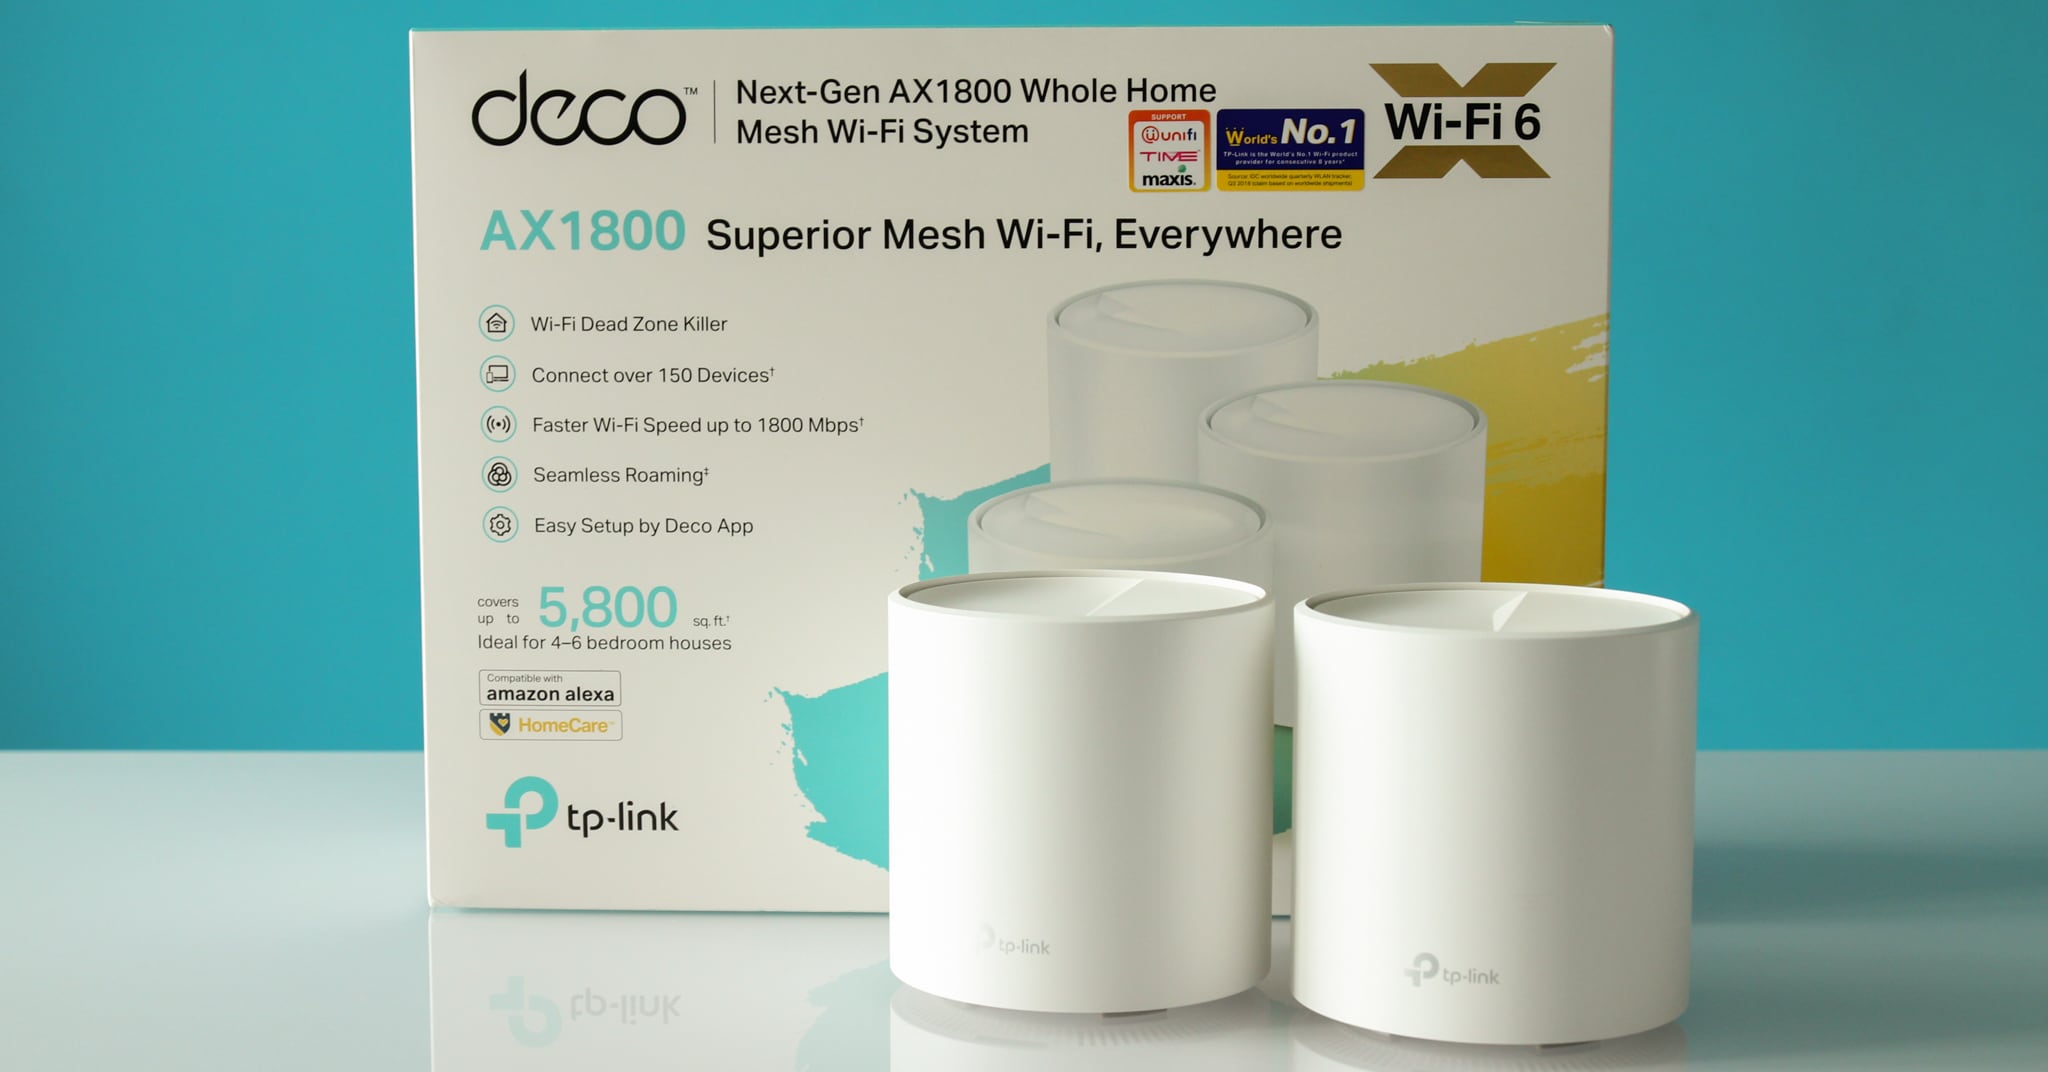 Why is Ubiquiti AC better than TP-Link mesh like Deco M5 for